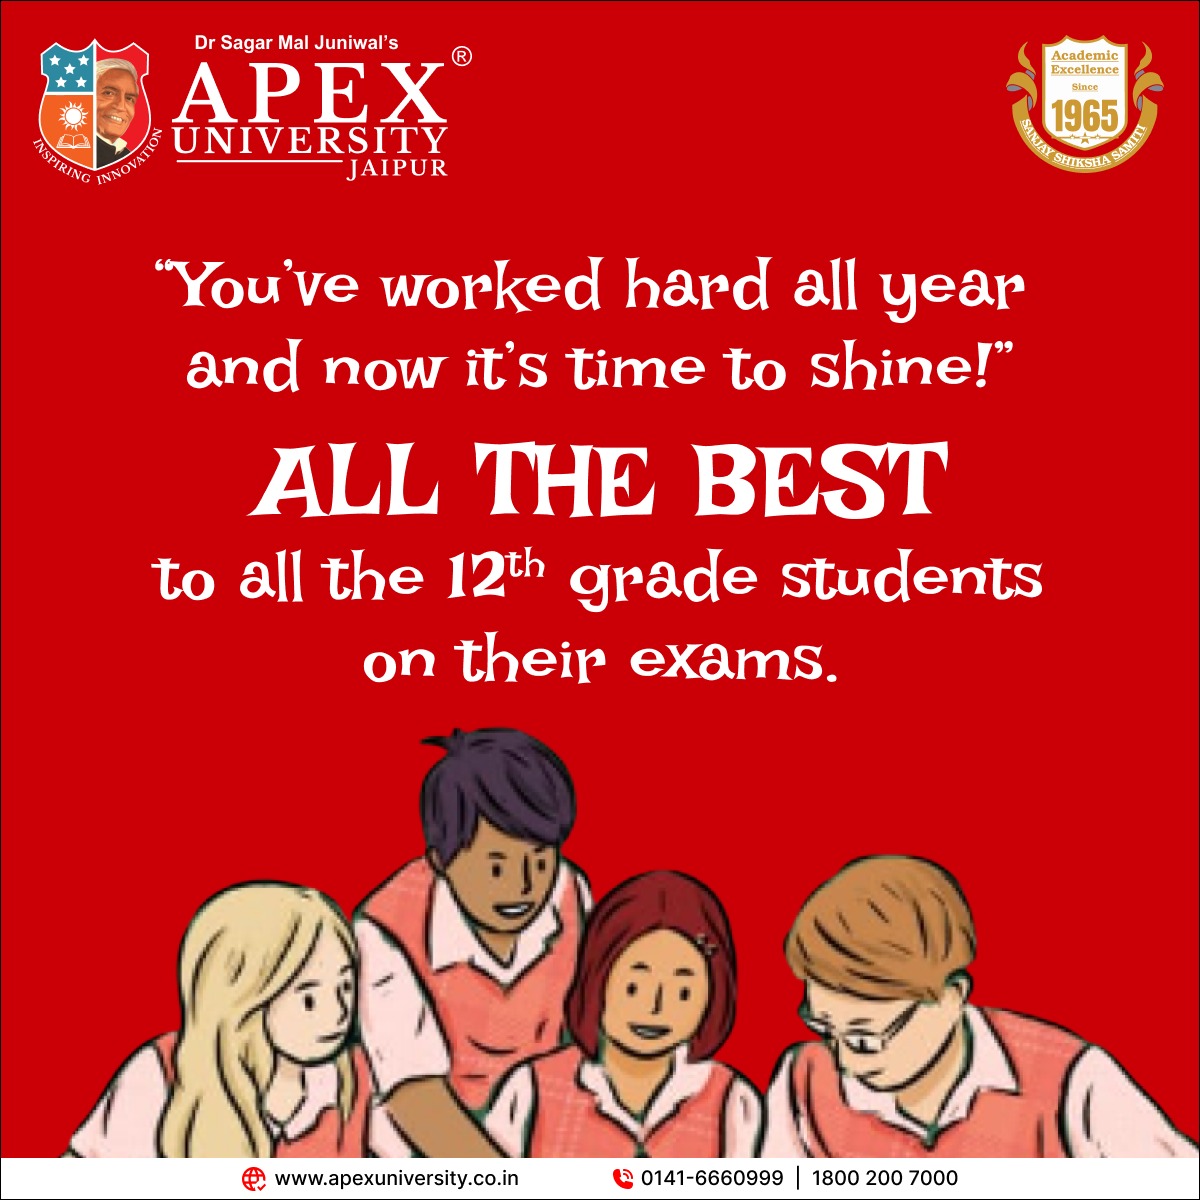 'You've worked hard all year, and now it's time to shine!'
ALL THE BEST to all the 12th grade students on their exams.

#12th #12thclass #12thstudents #allthebest #apexinternationalschool #apexschooljaipur #bestschoolinjaipur #topschoolinjaipur